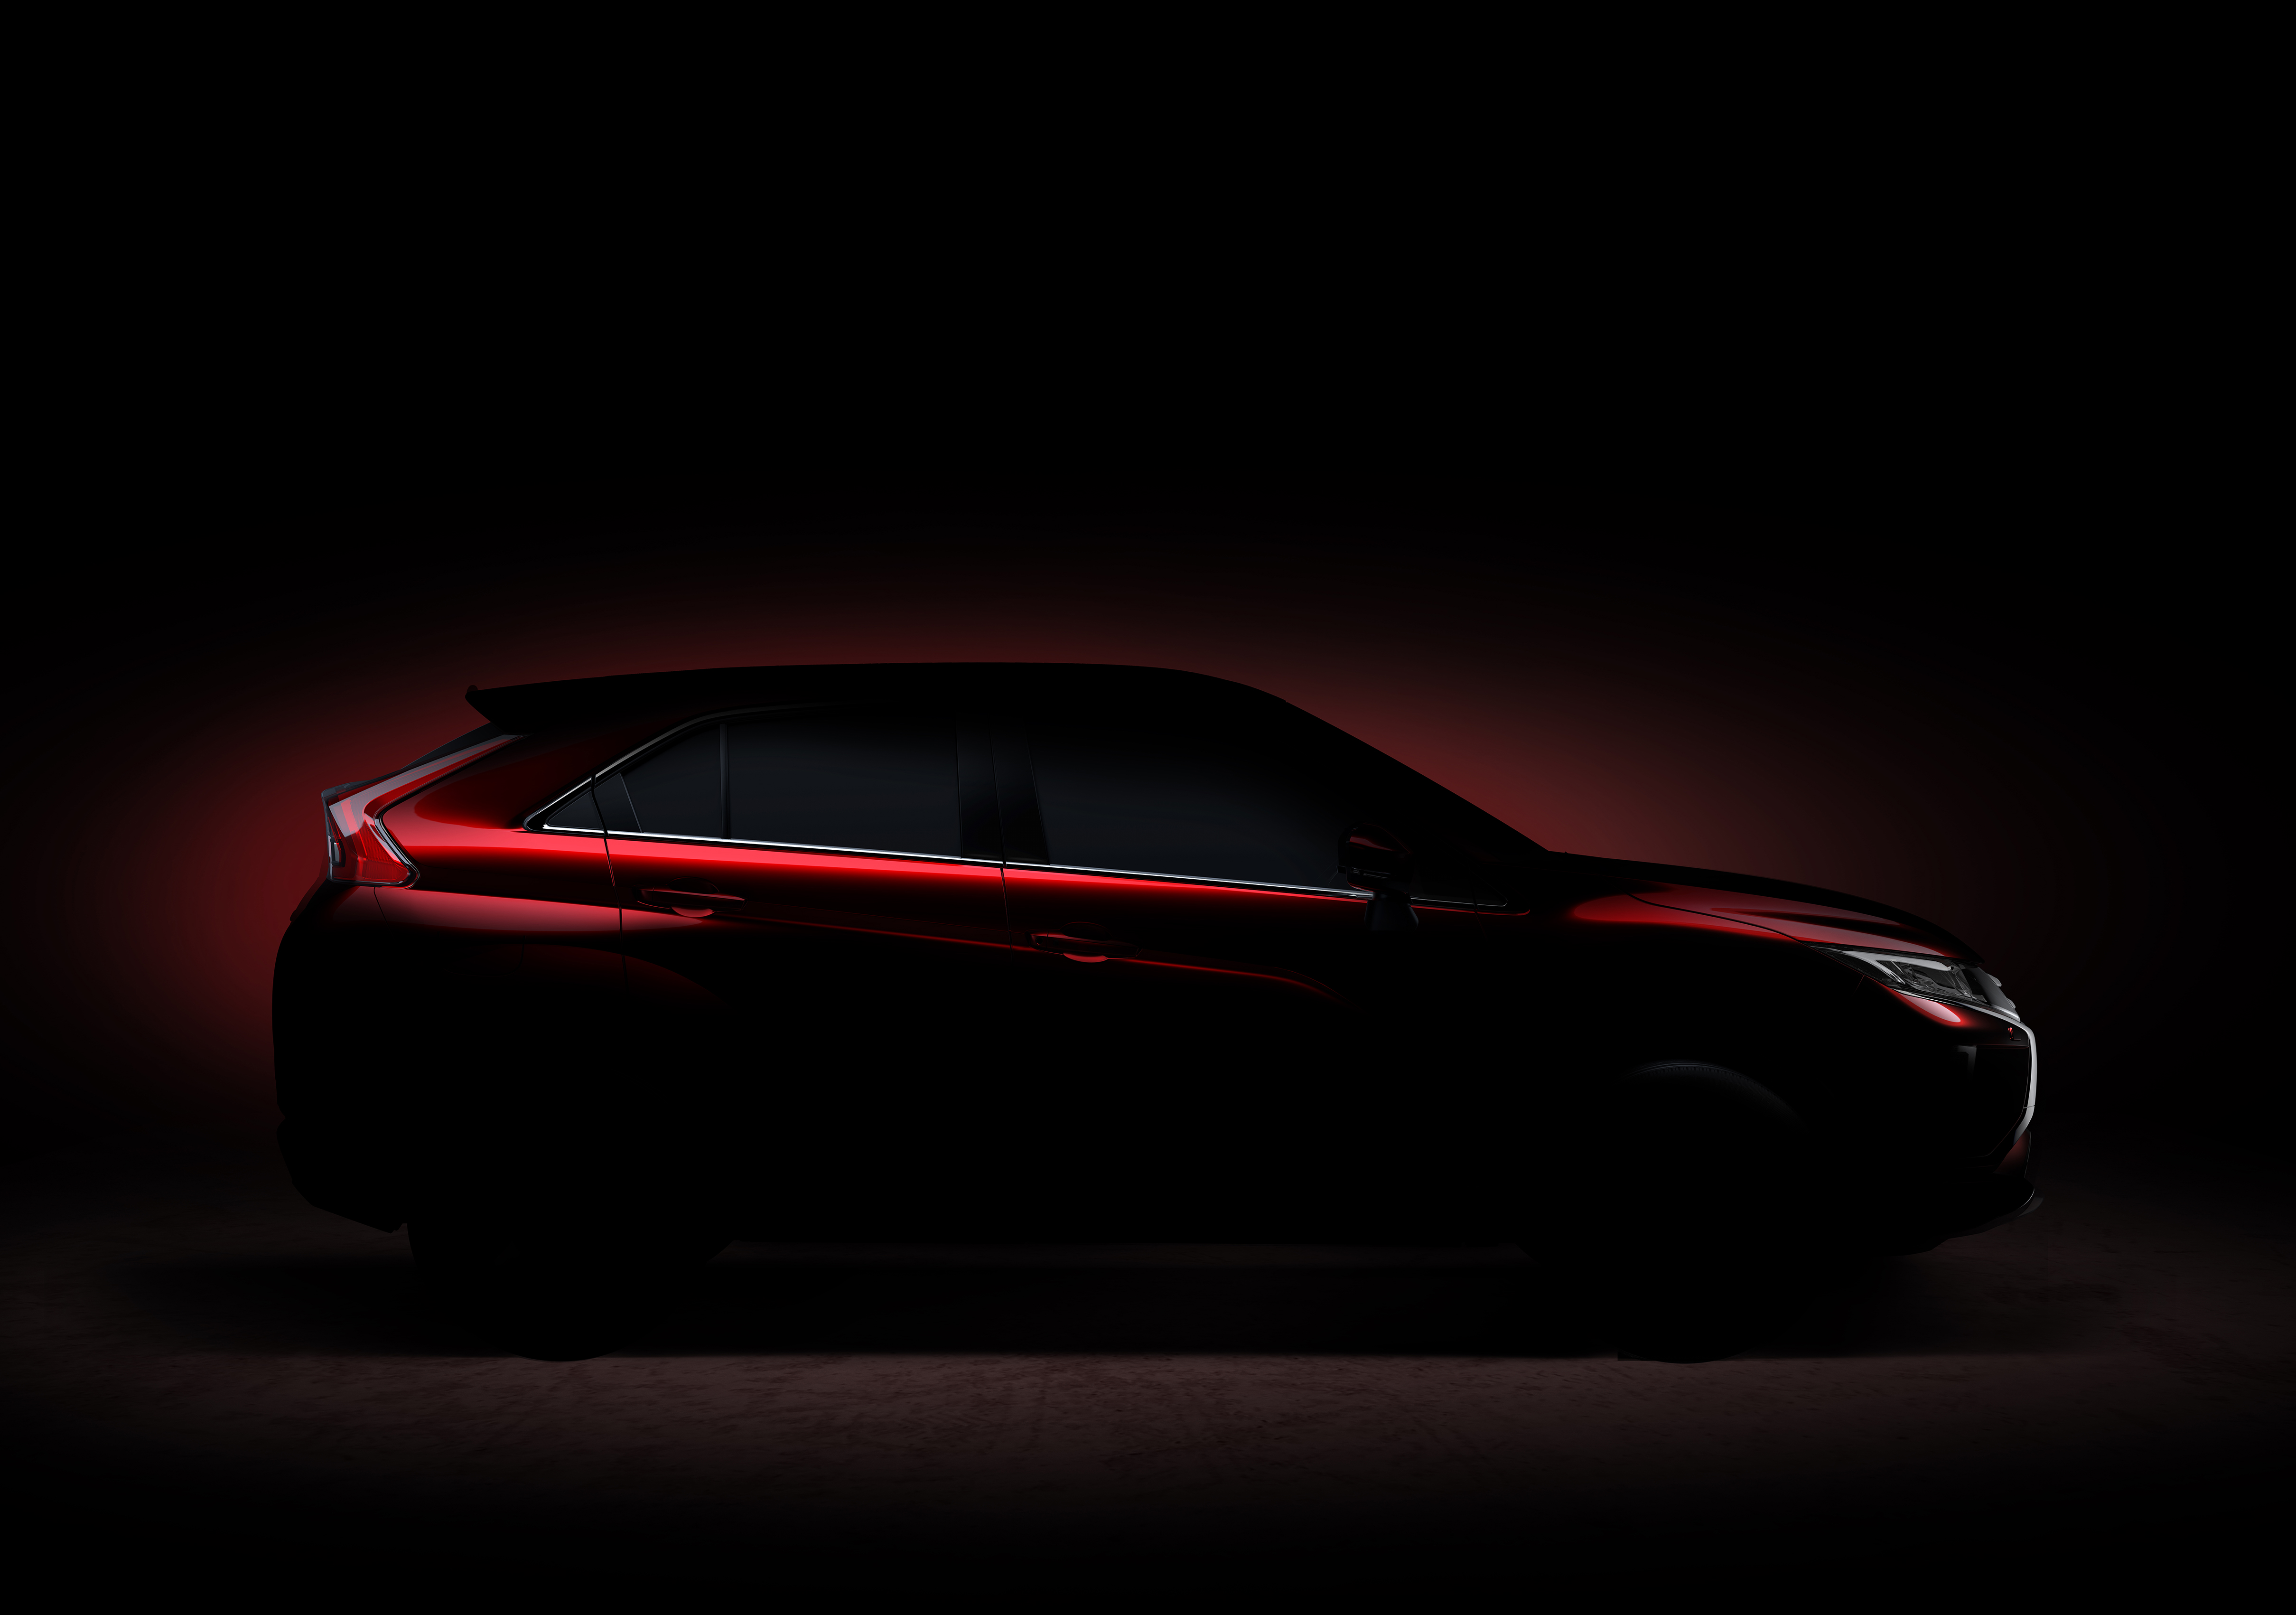 Coupe-like SUV on the way from Mitsubishi